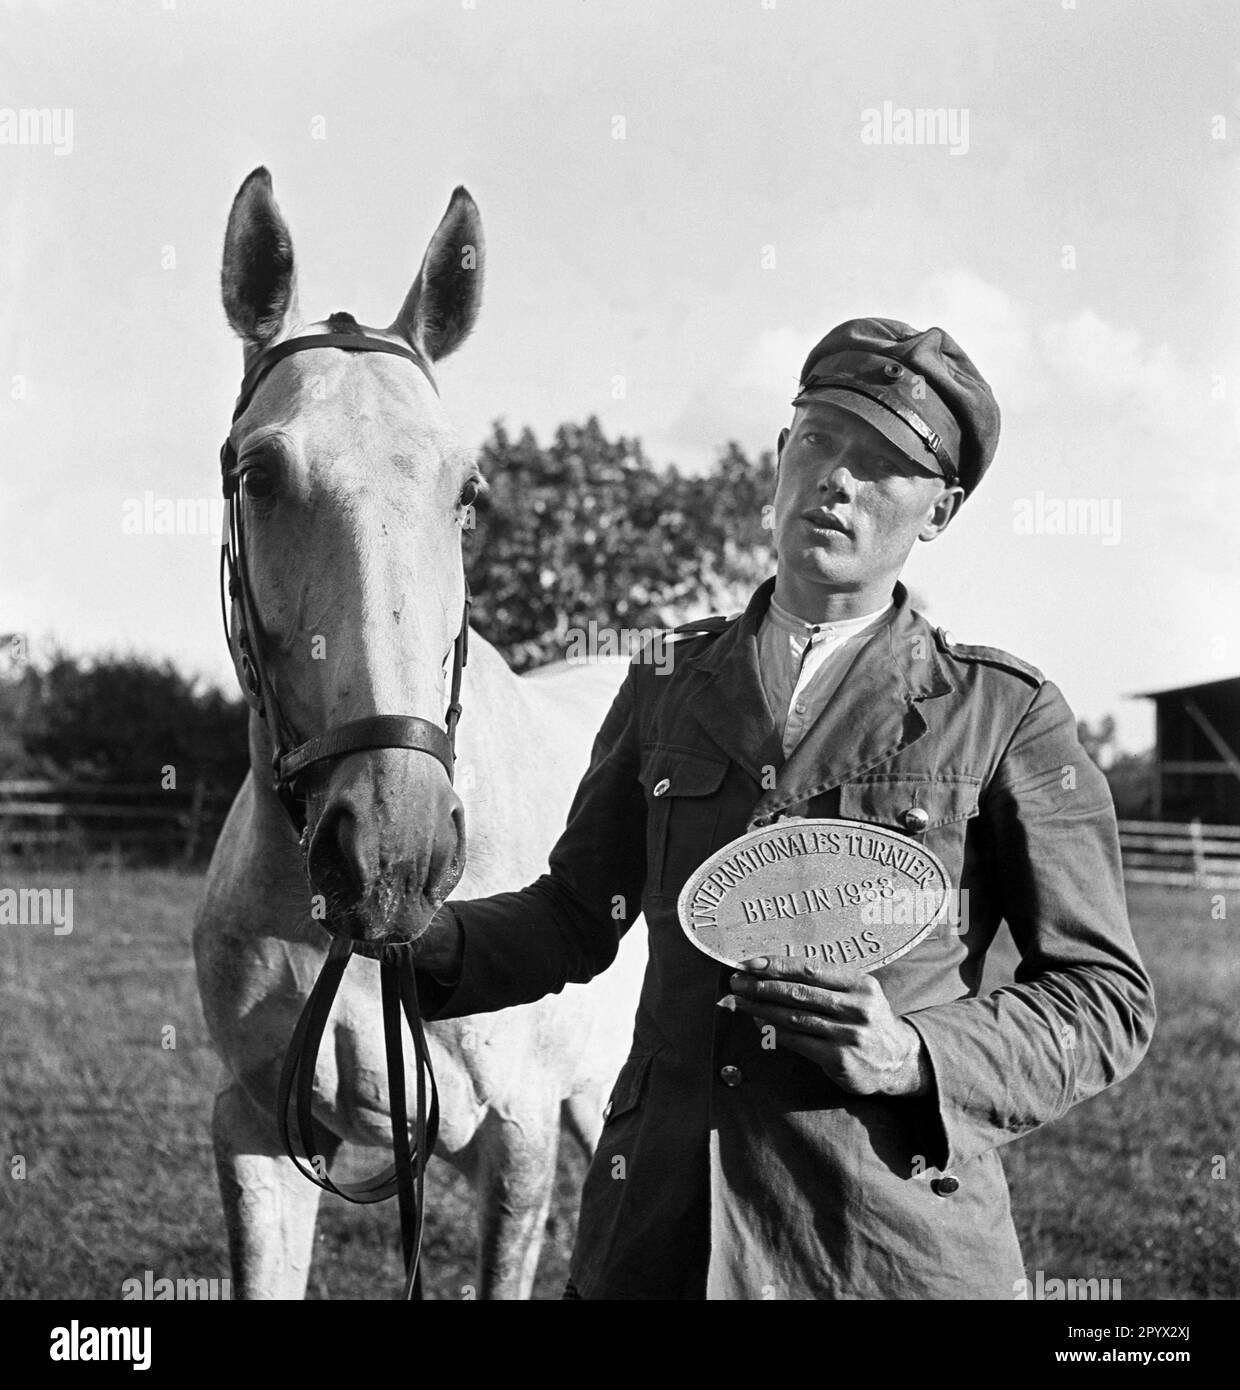 'The stud farm ''Broock'' in the district of Demmin (Pommern): A man presents his medal with the inscription: ''International Tournament, Berlin 1933, 1st Prize''. He is probably the show jumper who keeps his horse on a leash with his other hand.' Stock Photo